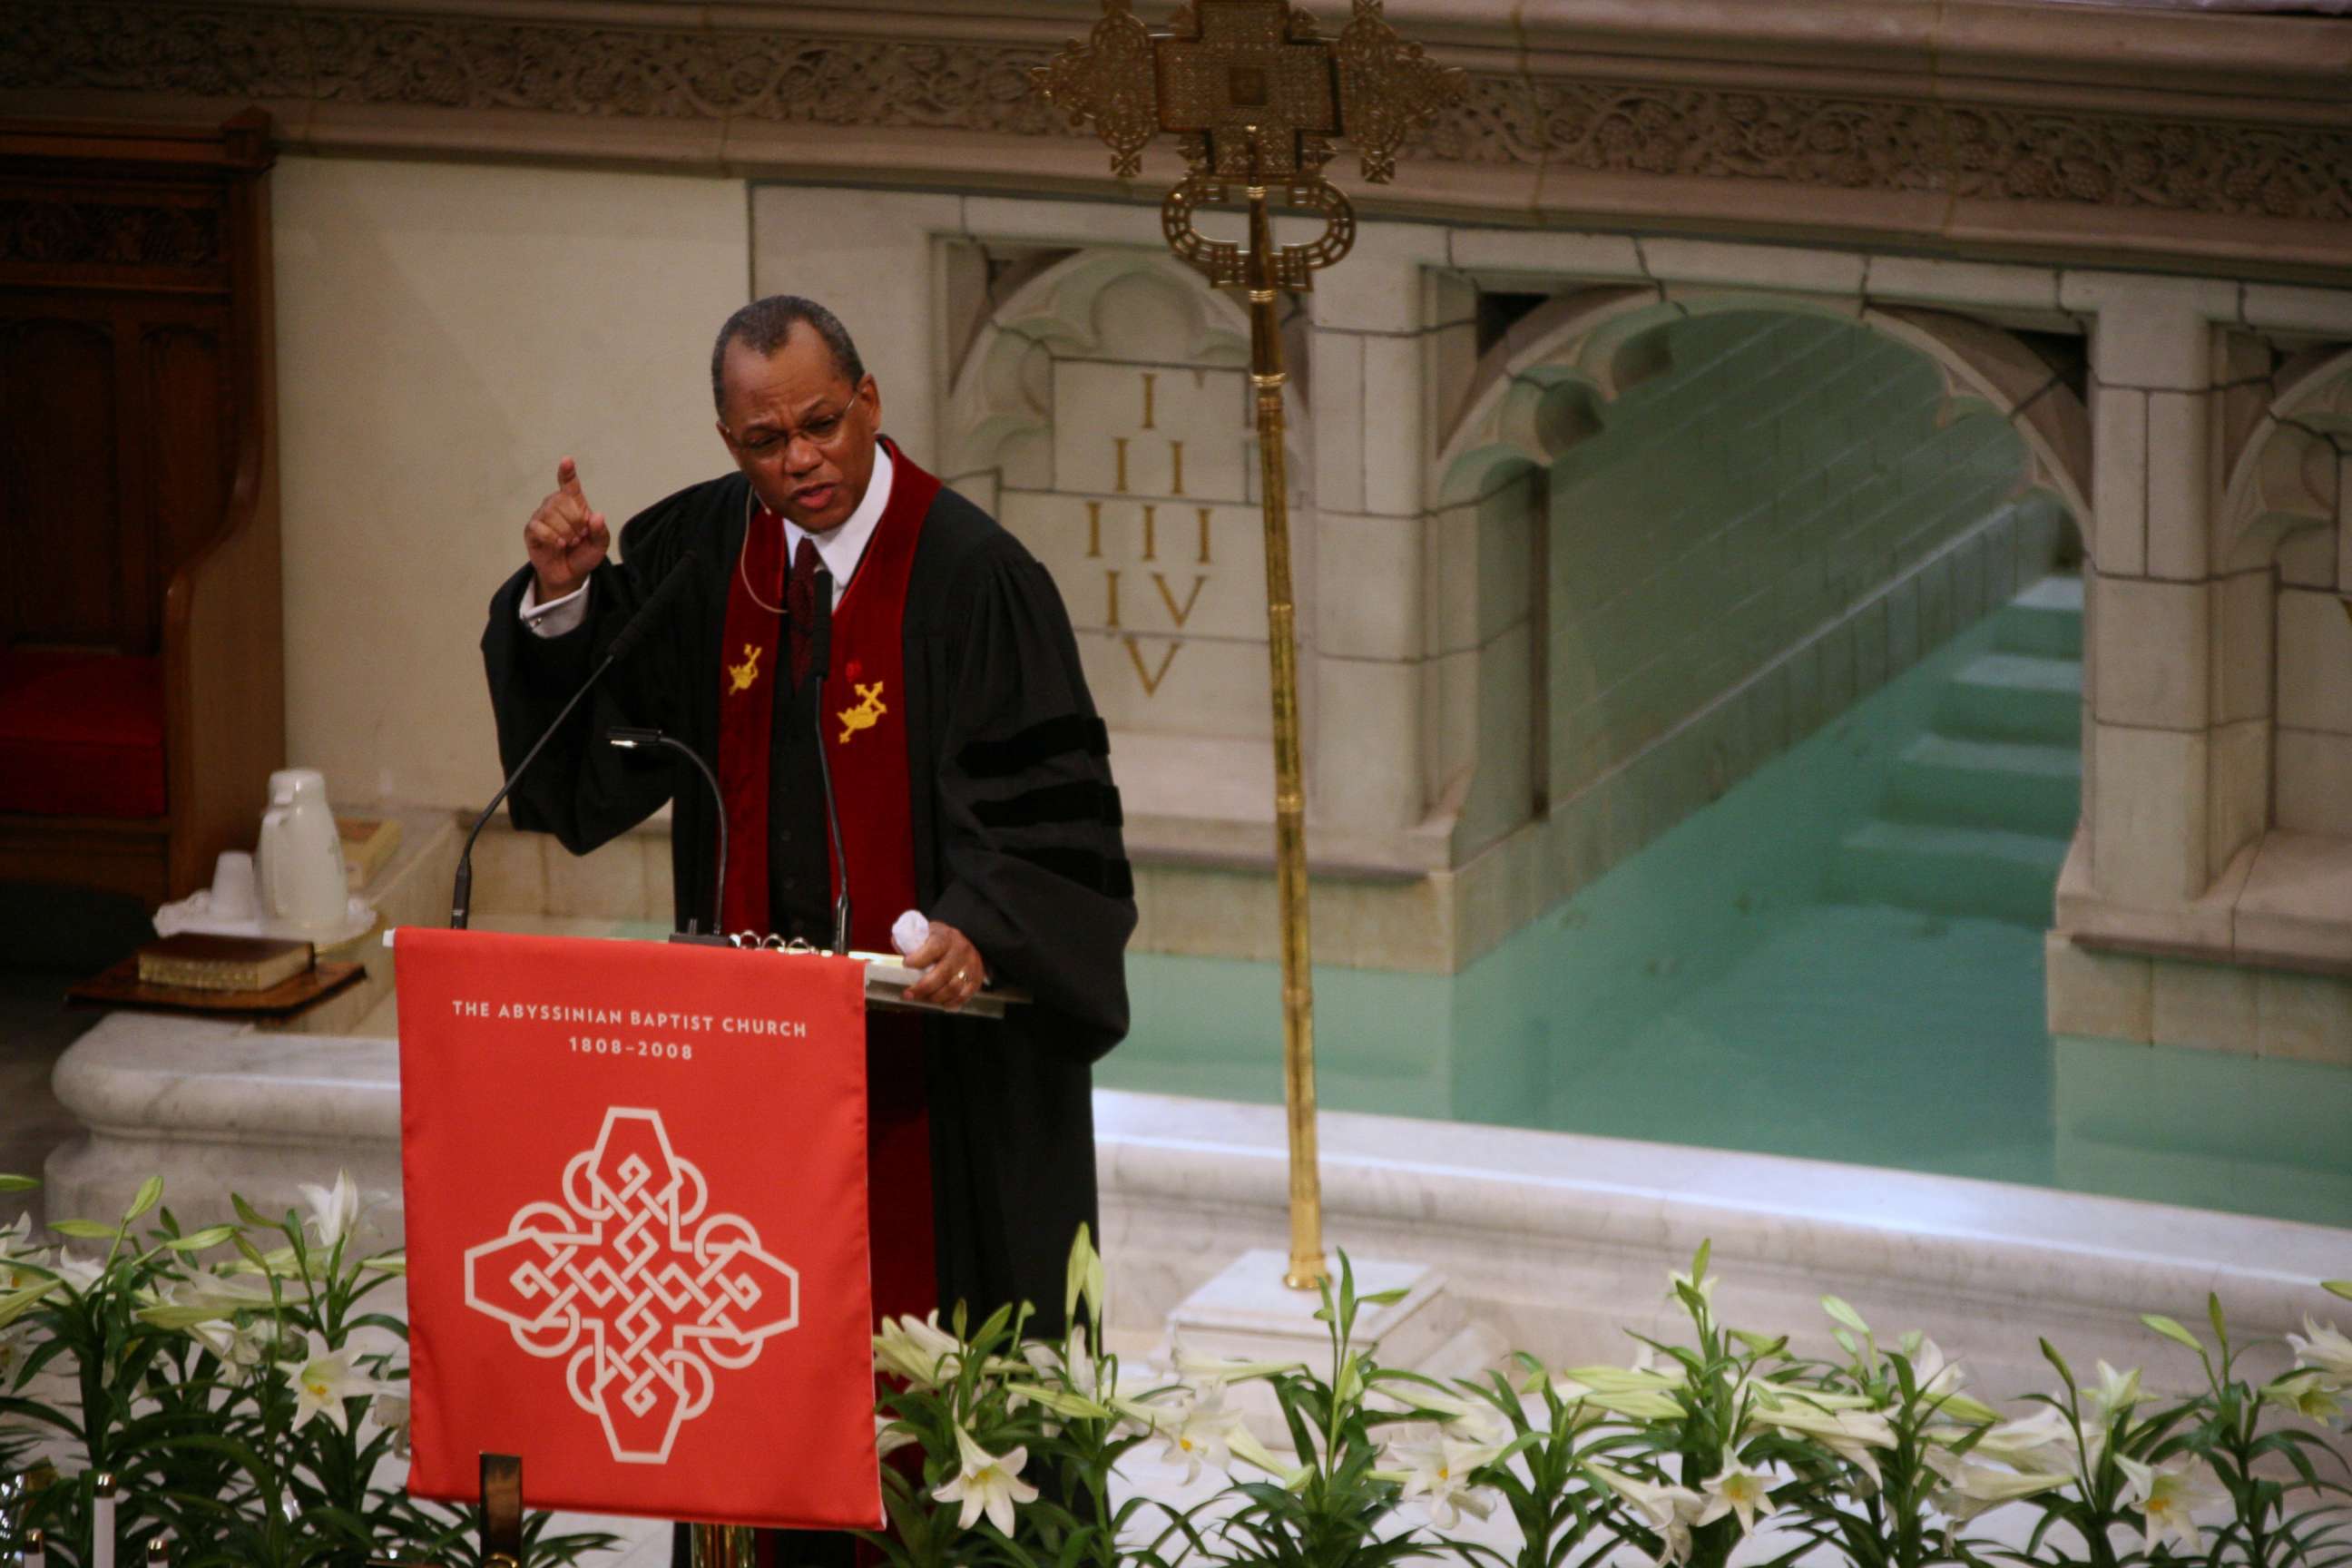 PHOTO: In this March 23, 2008, file photo, Reverend Dr. Calvin O. Butts III is shown at the Abyssinian Baptist Church in Harlem, New York.